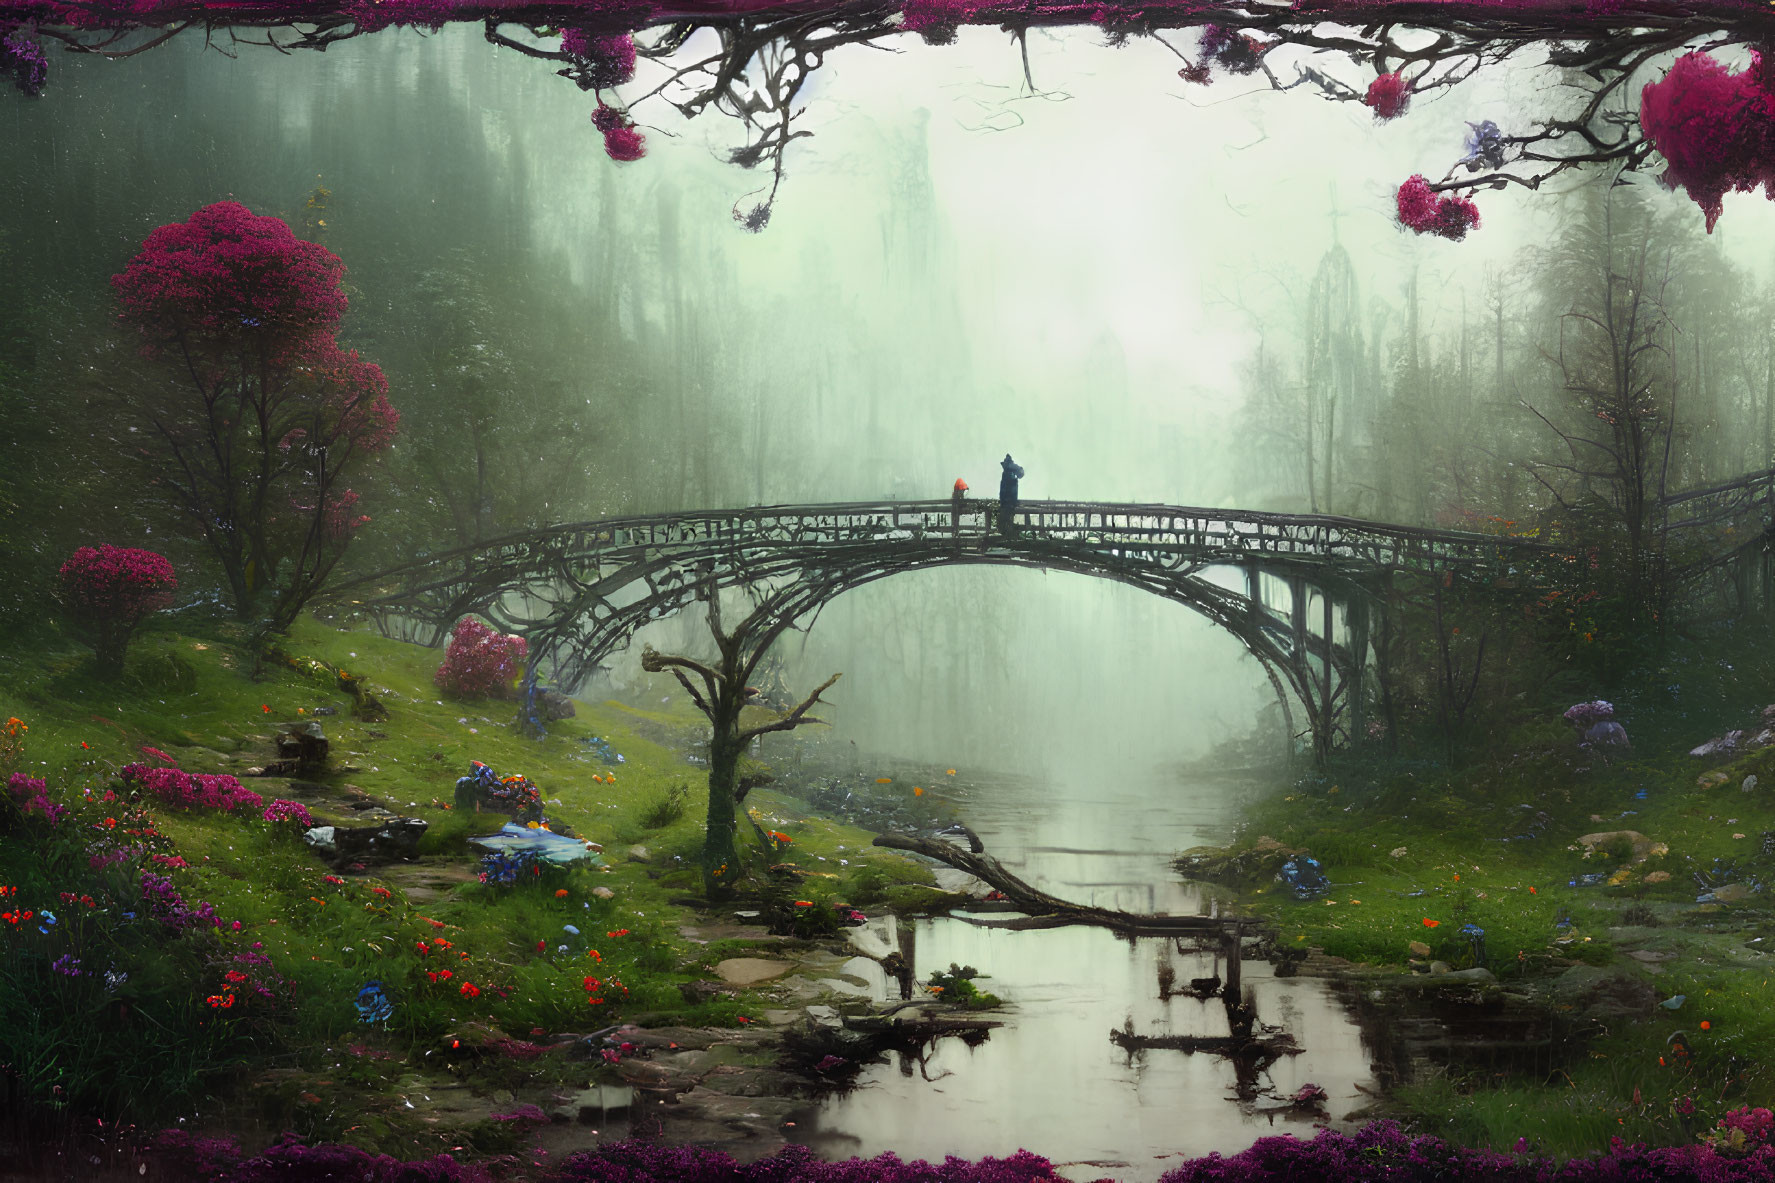 Person standing on wooden bridge in mystical forest with blooming trees